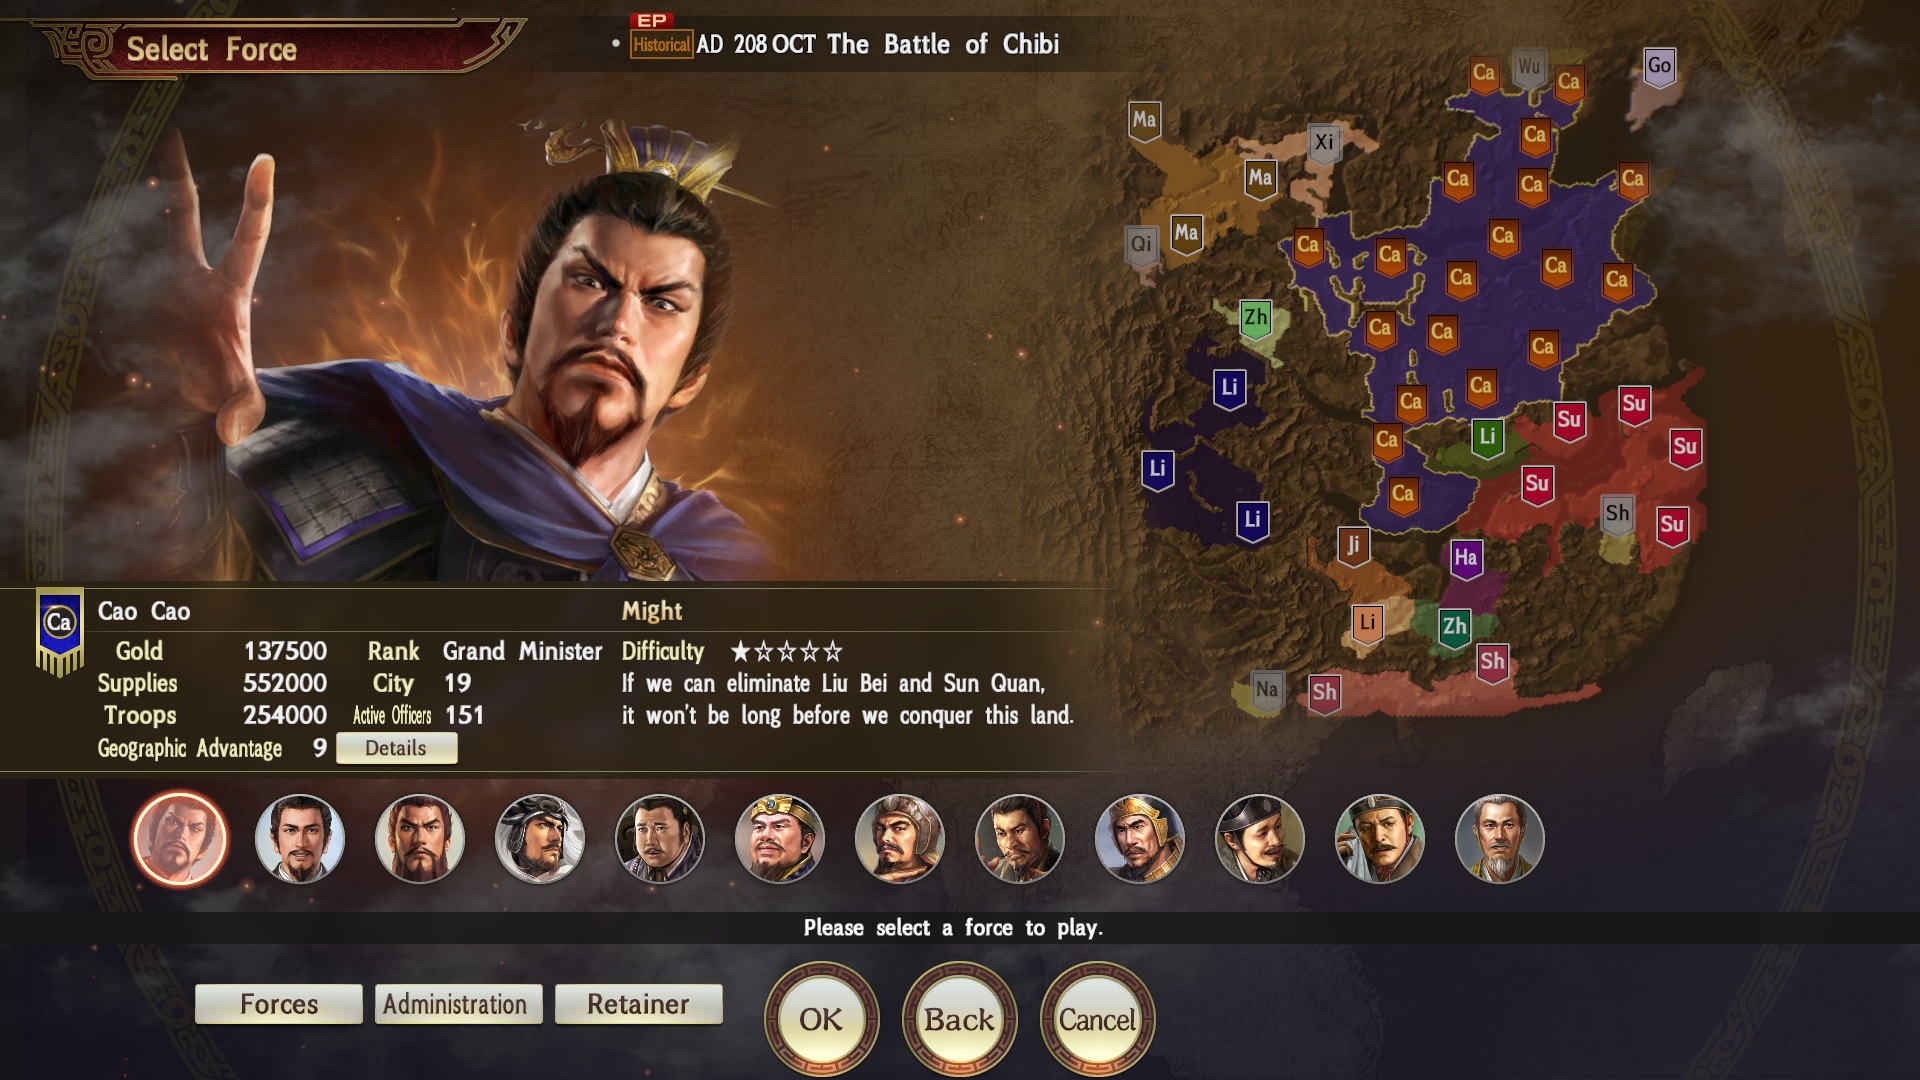 Romance Of The Three Kingdoms Xiv Diplomacy And Strategy Expansion Pack Details And Screenshots Scenarios Event Editor Officer Characteristics Nintendo Everything